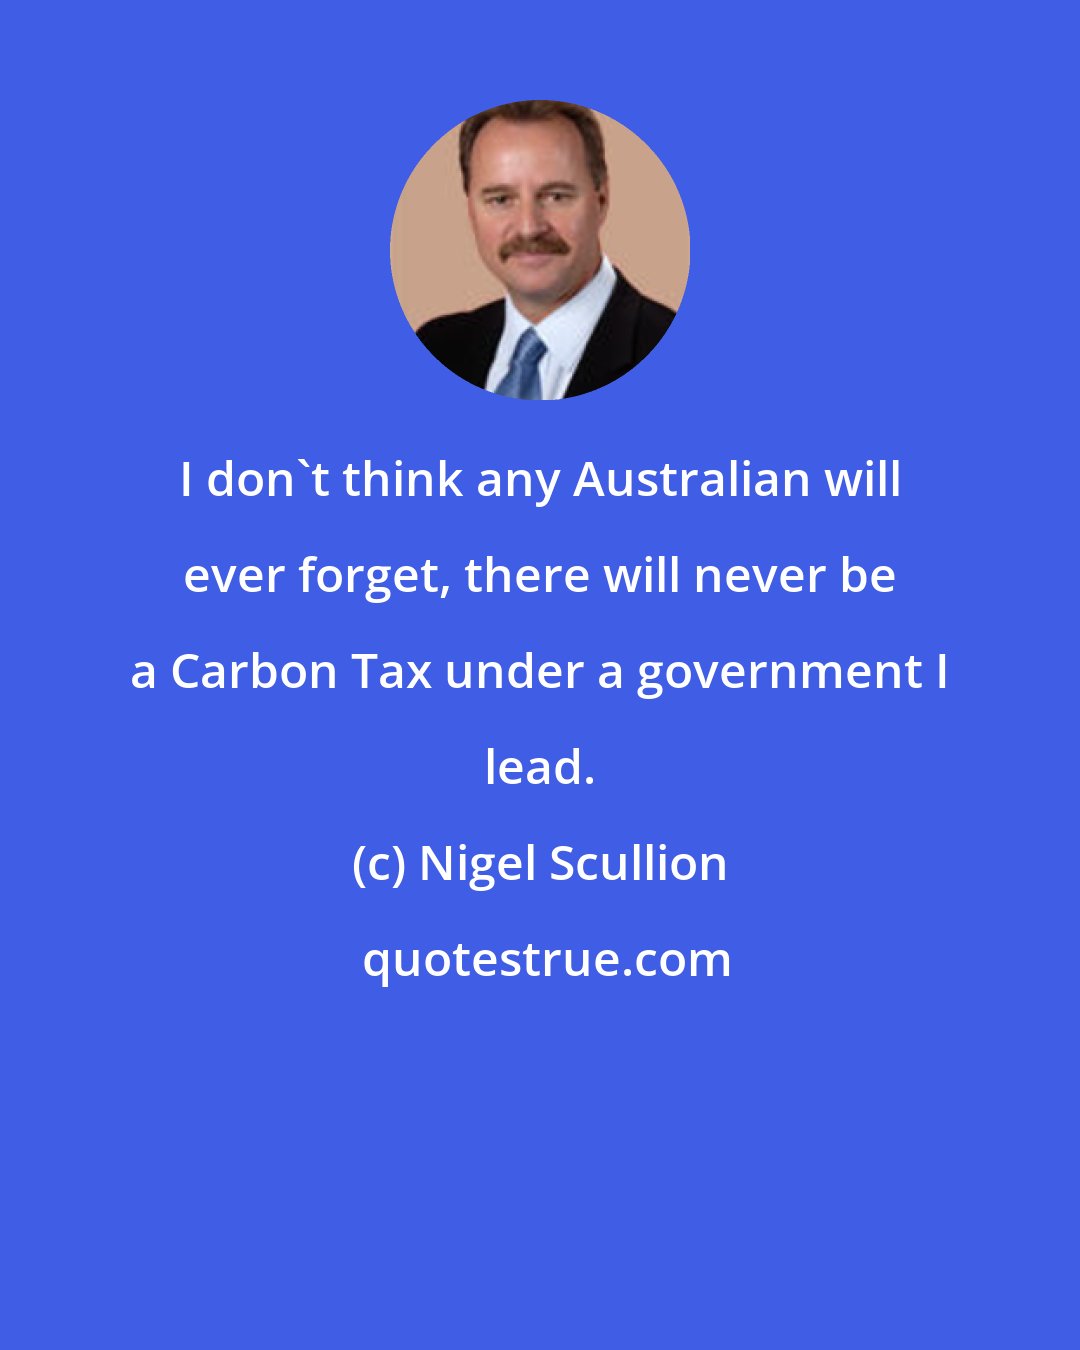 Nigel Scullion: I don't think any Australian will ever forget, there will never be a Carbon Tax under a government I lead.